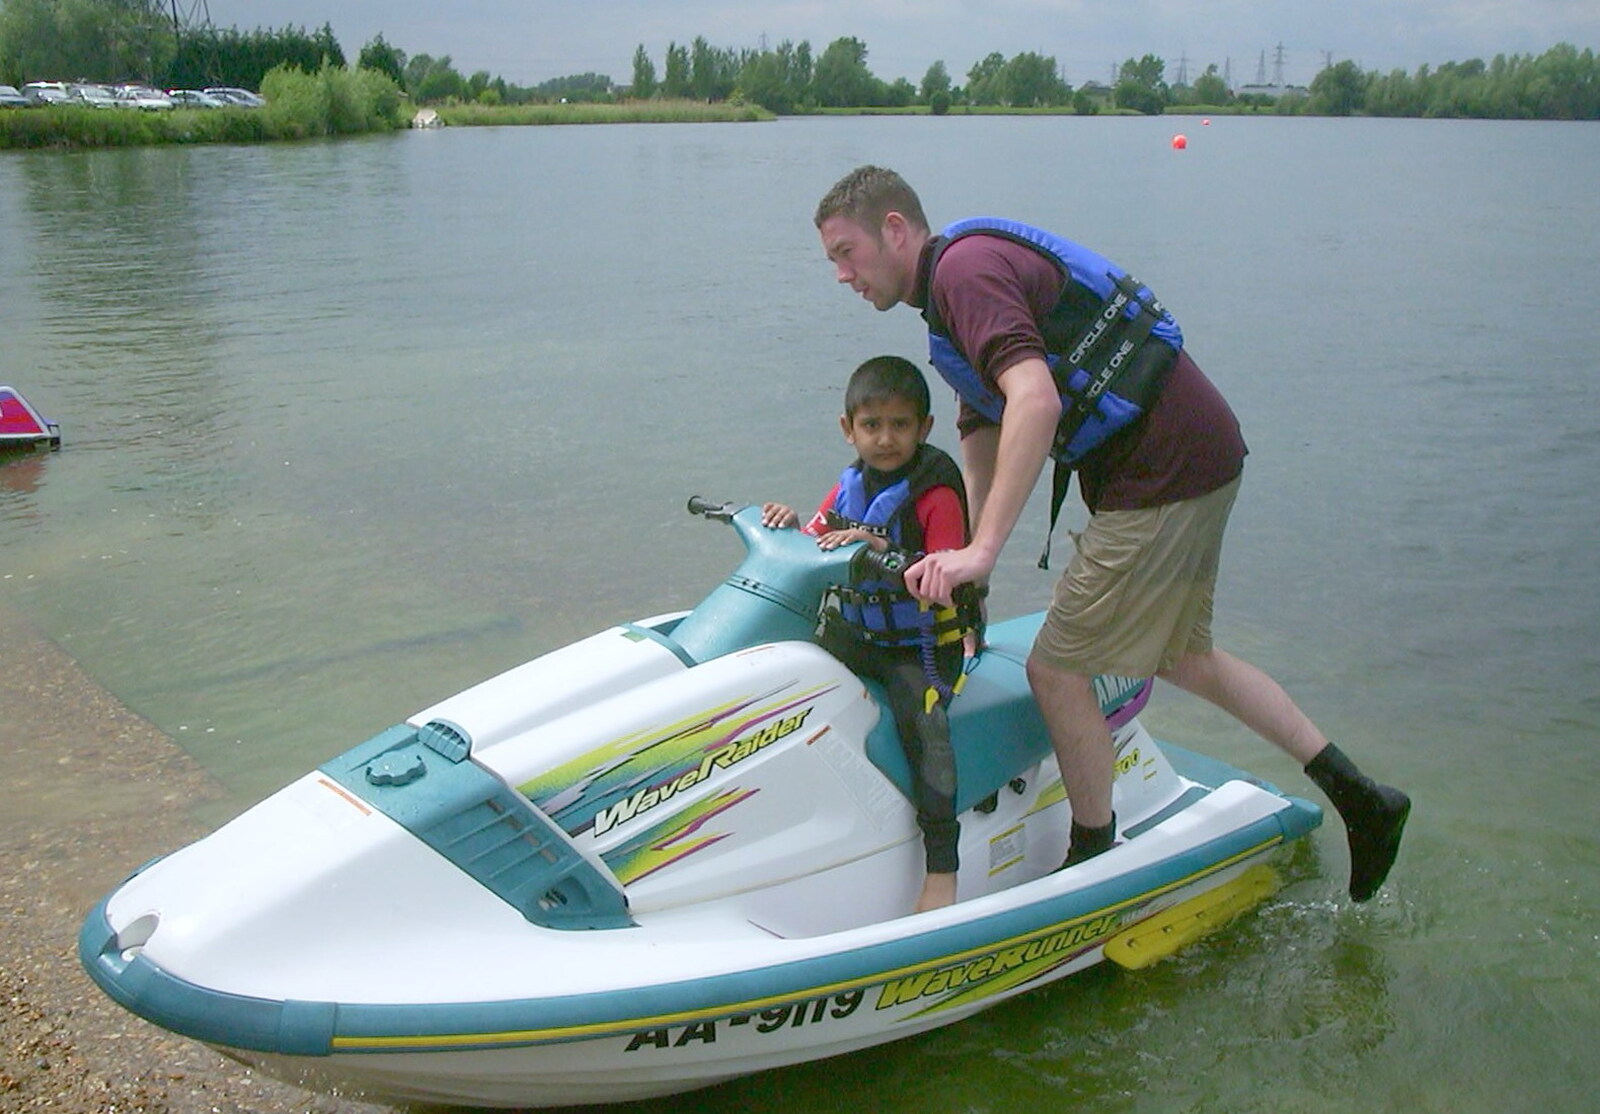 3G Lab Watersports Fun Day, Wyboston, Bedfordshire - 8th June 2002: Bill's boy gets a go on a jet boat